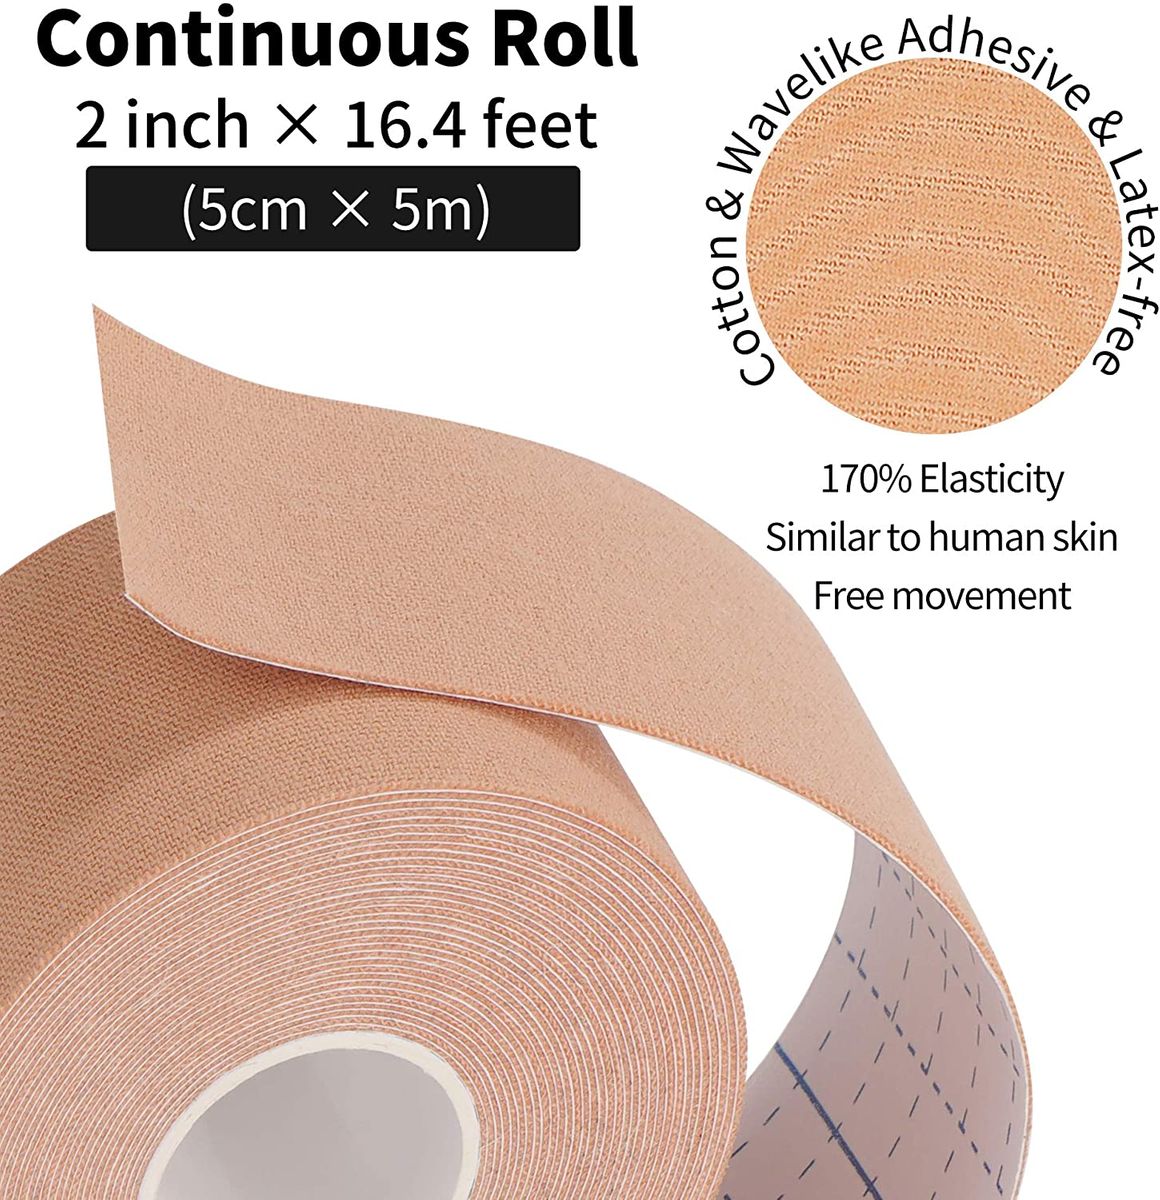 Fitop Kinesiology Tape Knee and Muscle Support, Kinesiotapes Sports Tape for Pain Management & Physiotherapy (3 Pack)